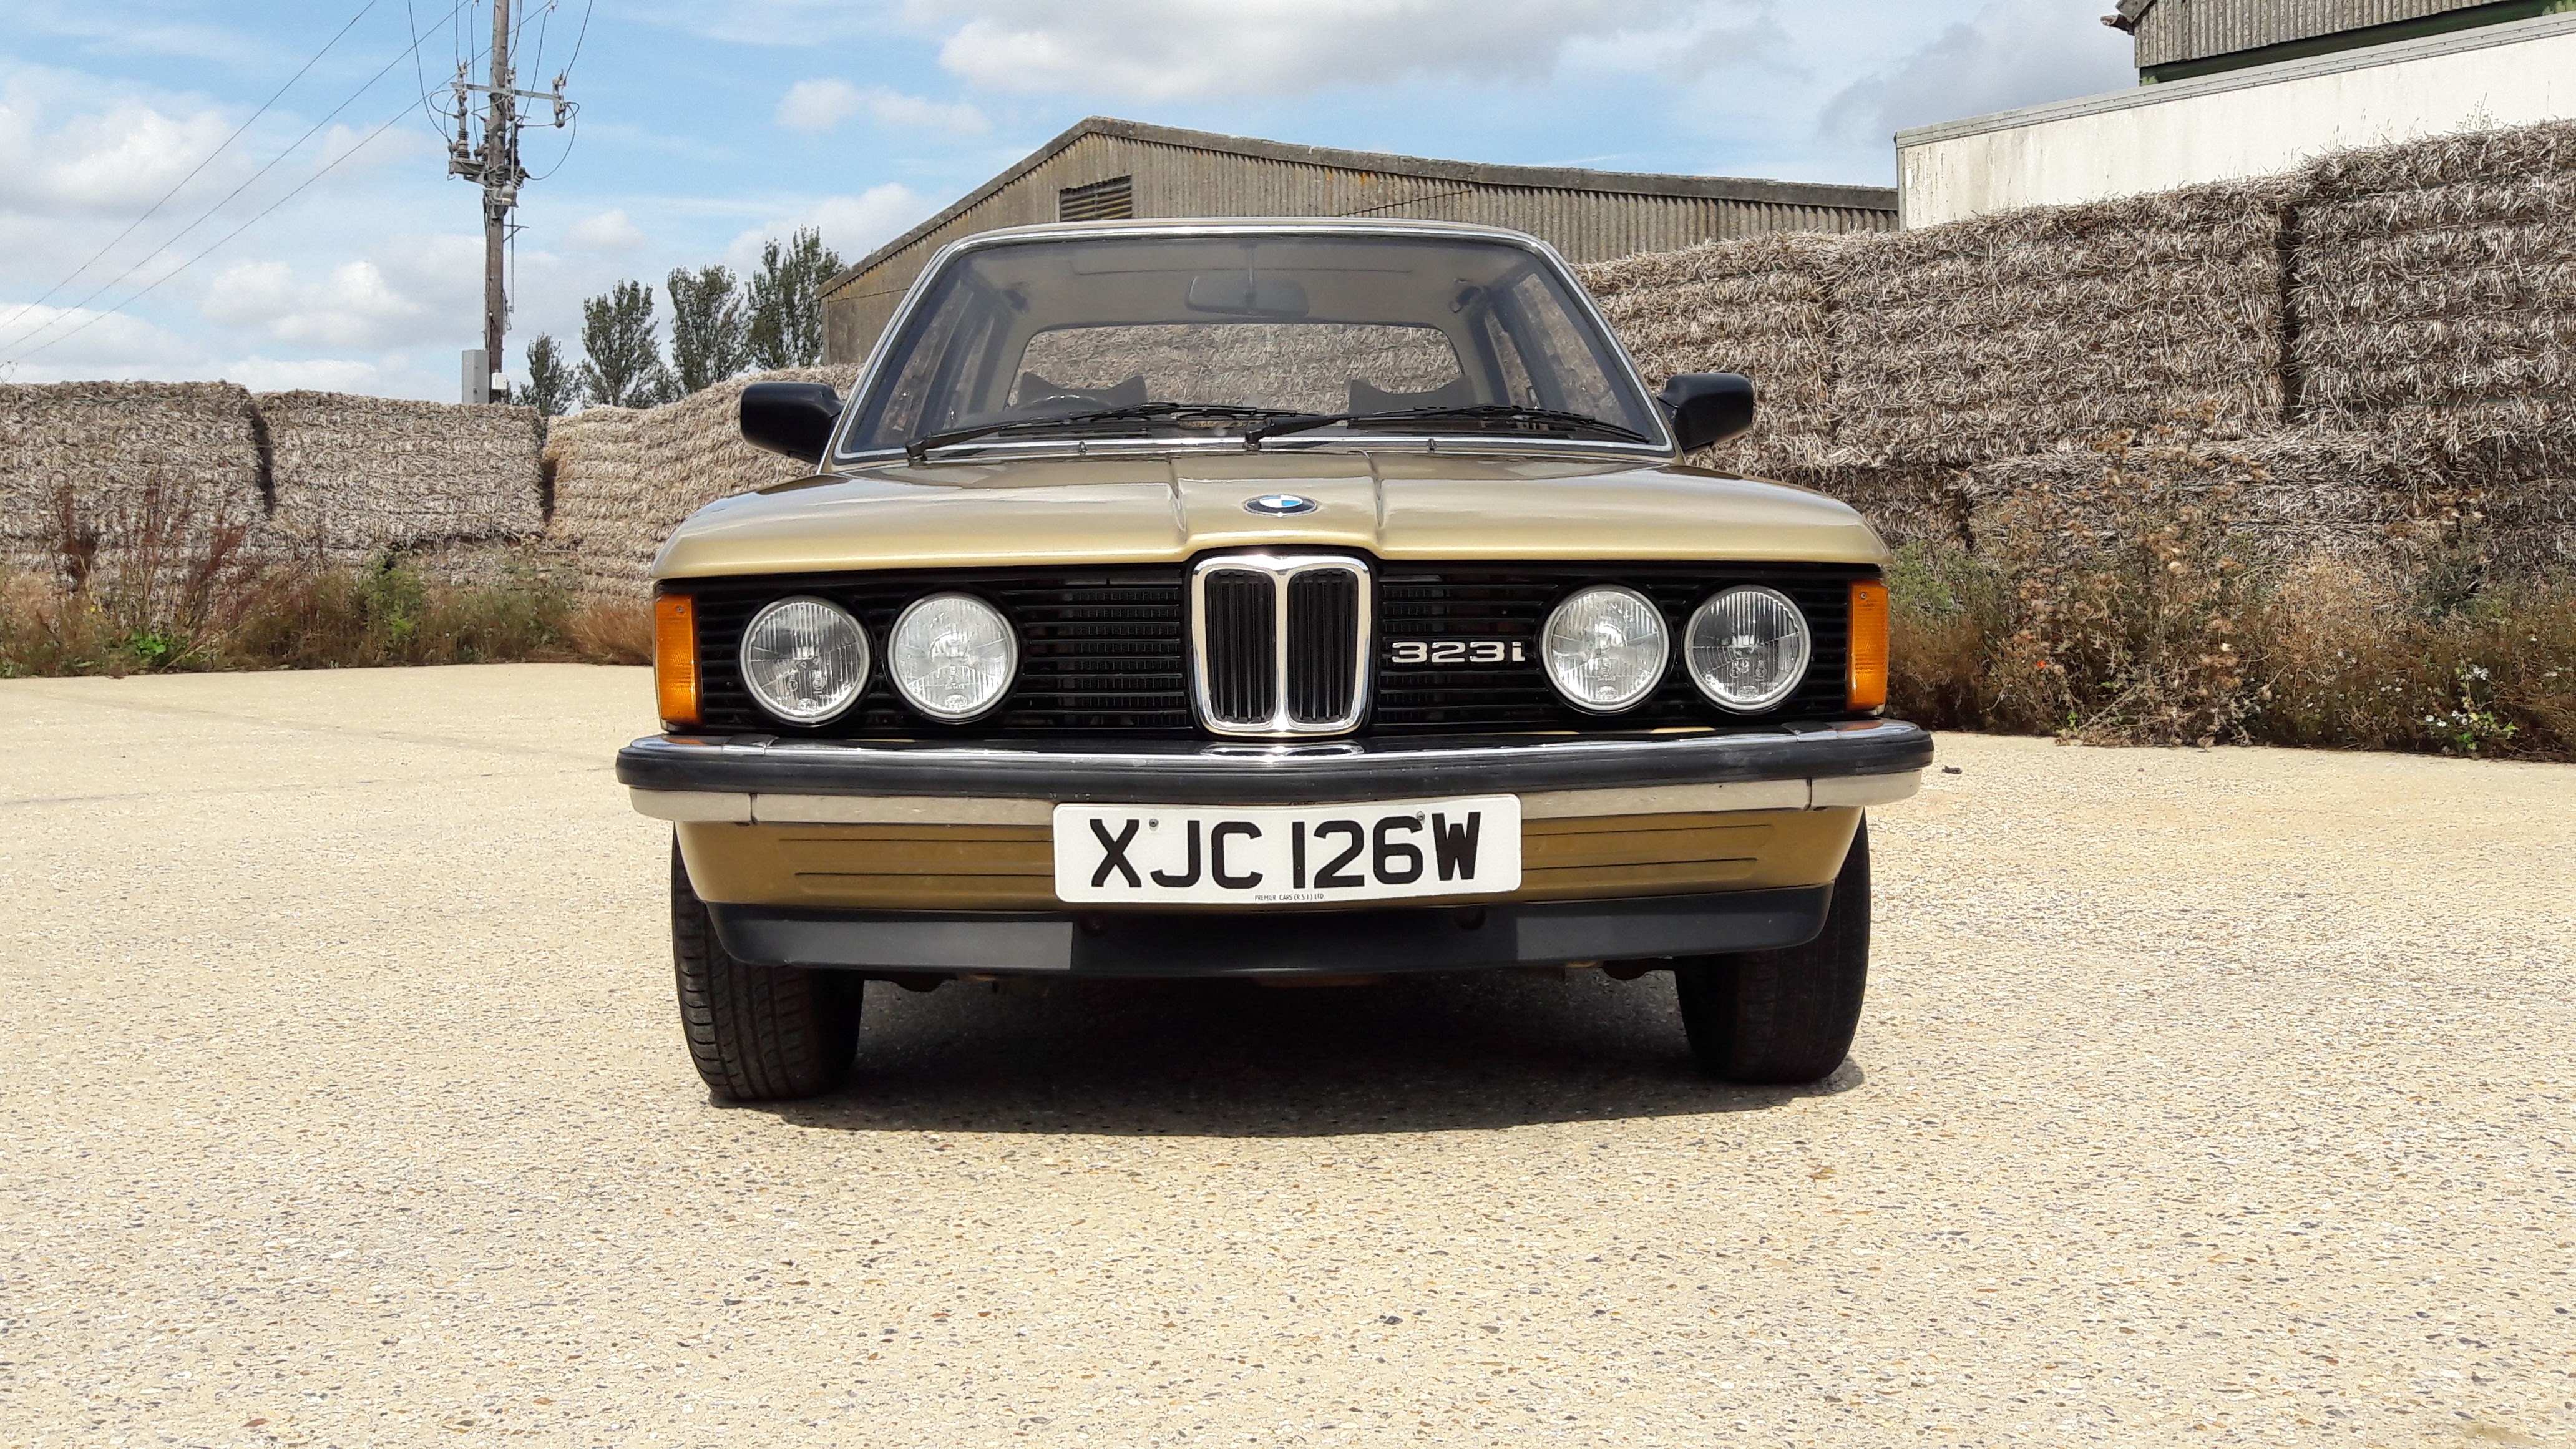 1980 BMW E21 323i - Page 1 - Readers' Cars - PistonHeads